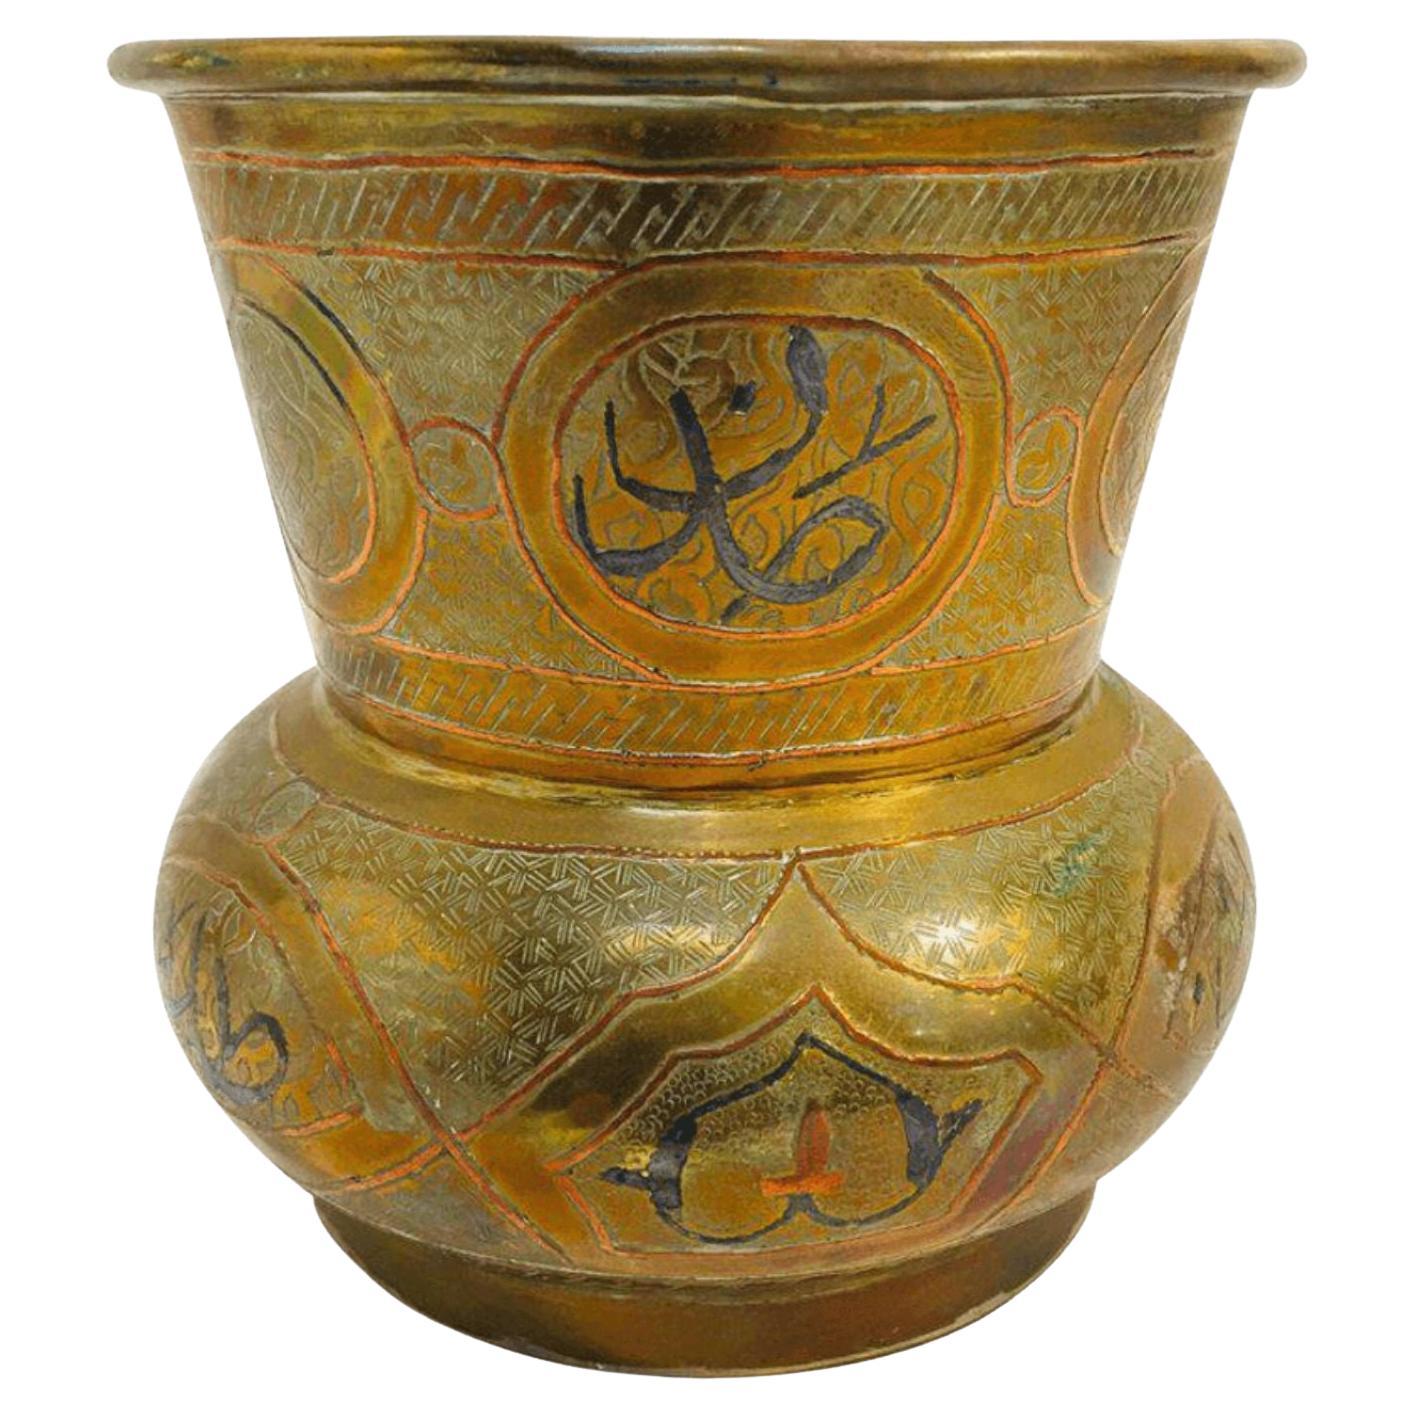 20th Century Middle Eastern Etched Islamic Brass Vase With Arabic Writing For Sale